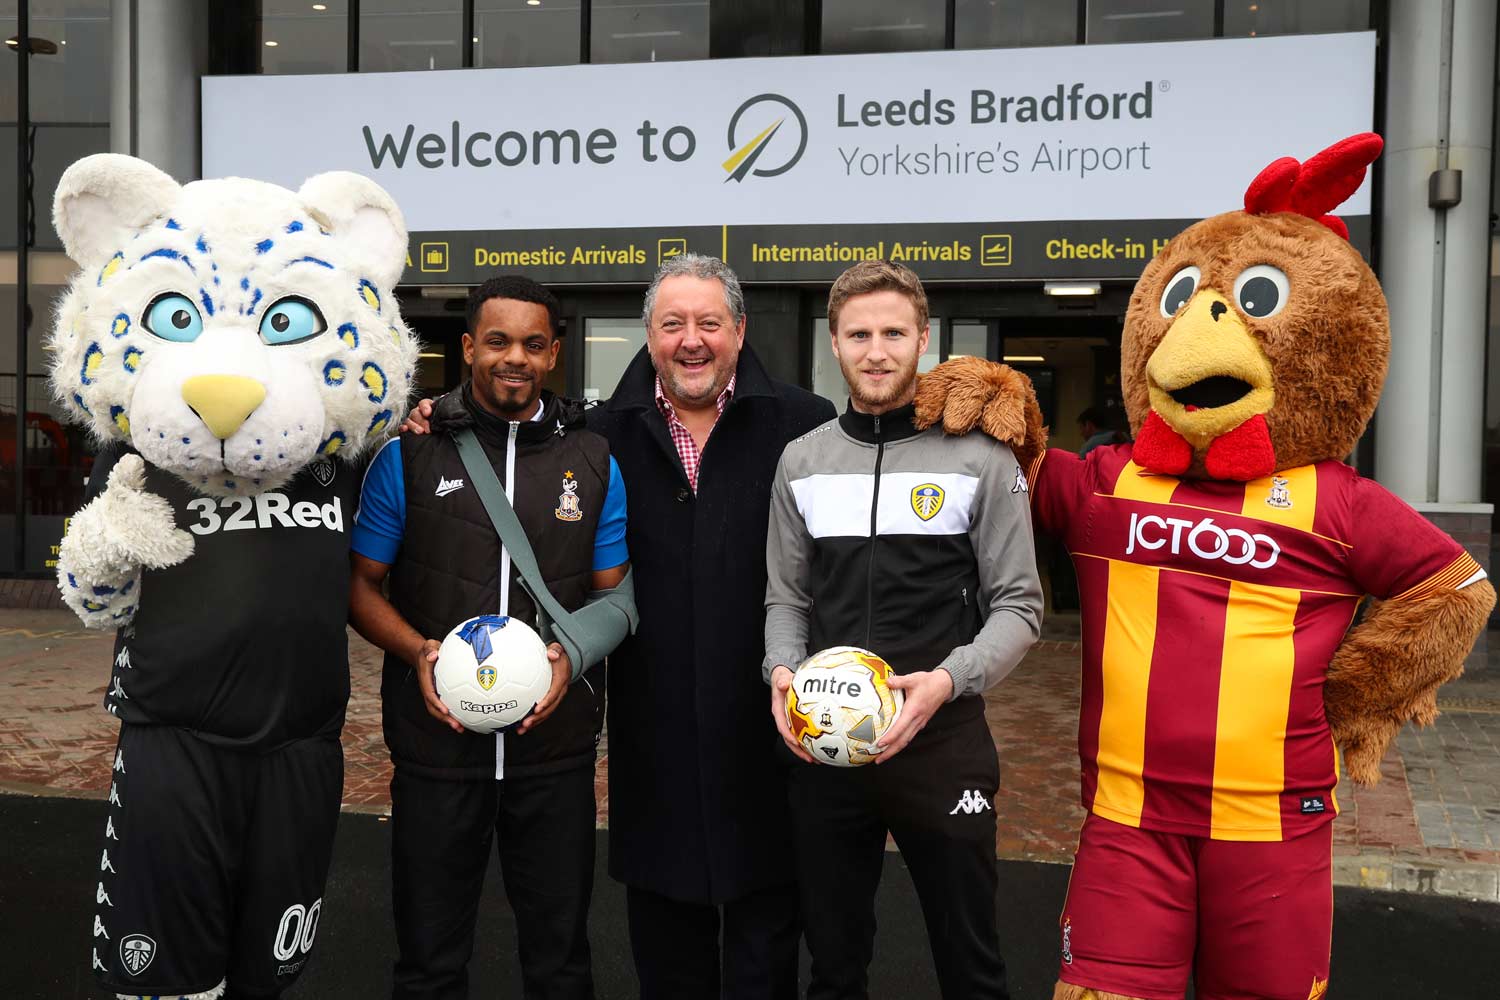 David Laws, CEO at Leeds Bradford Airport launches the partnership with Tyrell Robinson (Bradford City FC) and Eunan O’Kane (Leeds United FC).